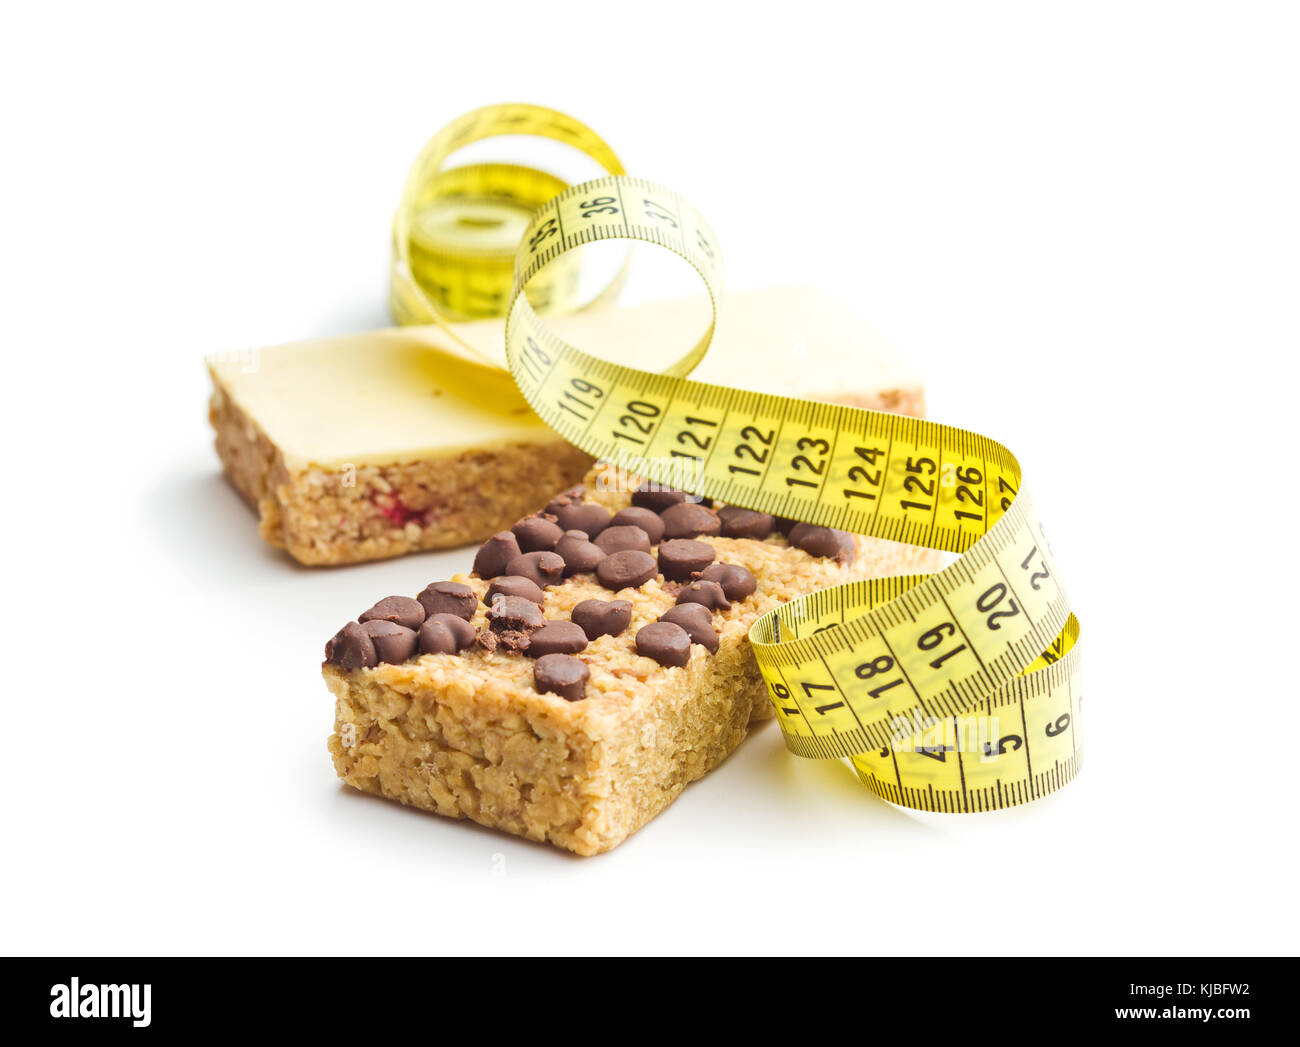 Oat protein bar and measuring tape isolated on white background. Diet concept. Stock Photo